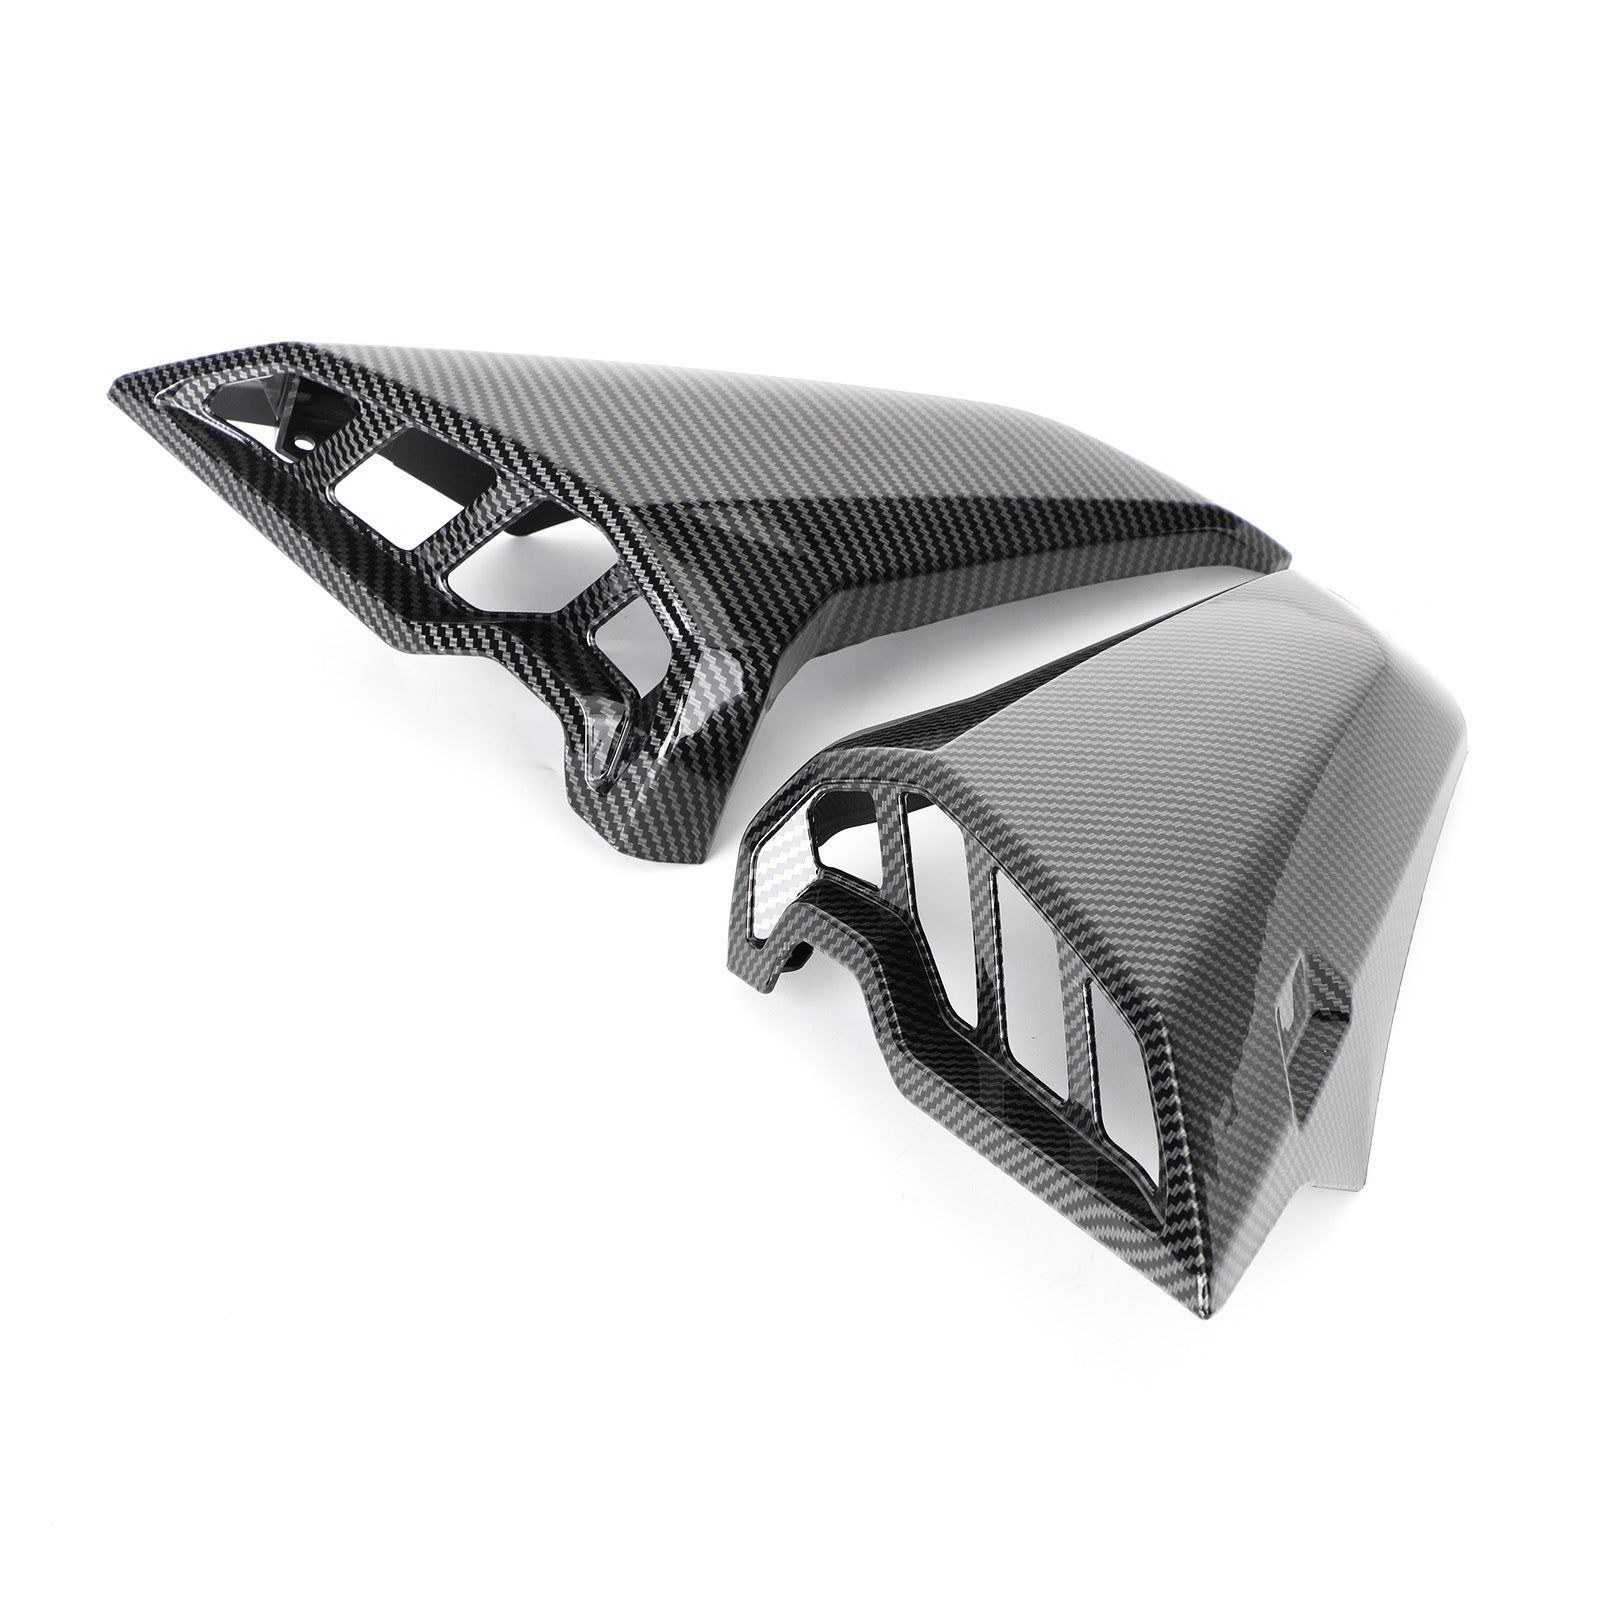 Air Intake Panel Fairing Covers Fit for Yamaha MT09 MT-09 FZ-09 2017-2020